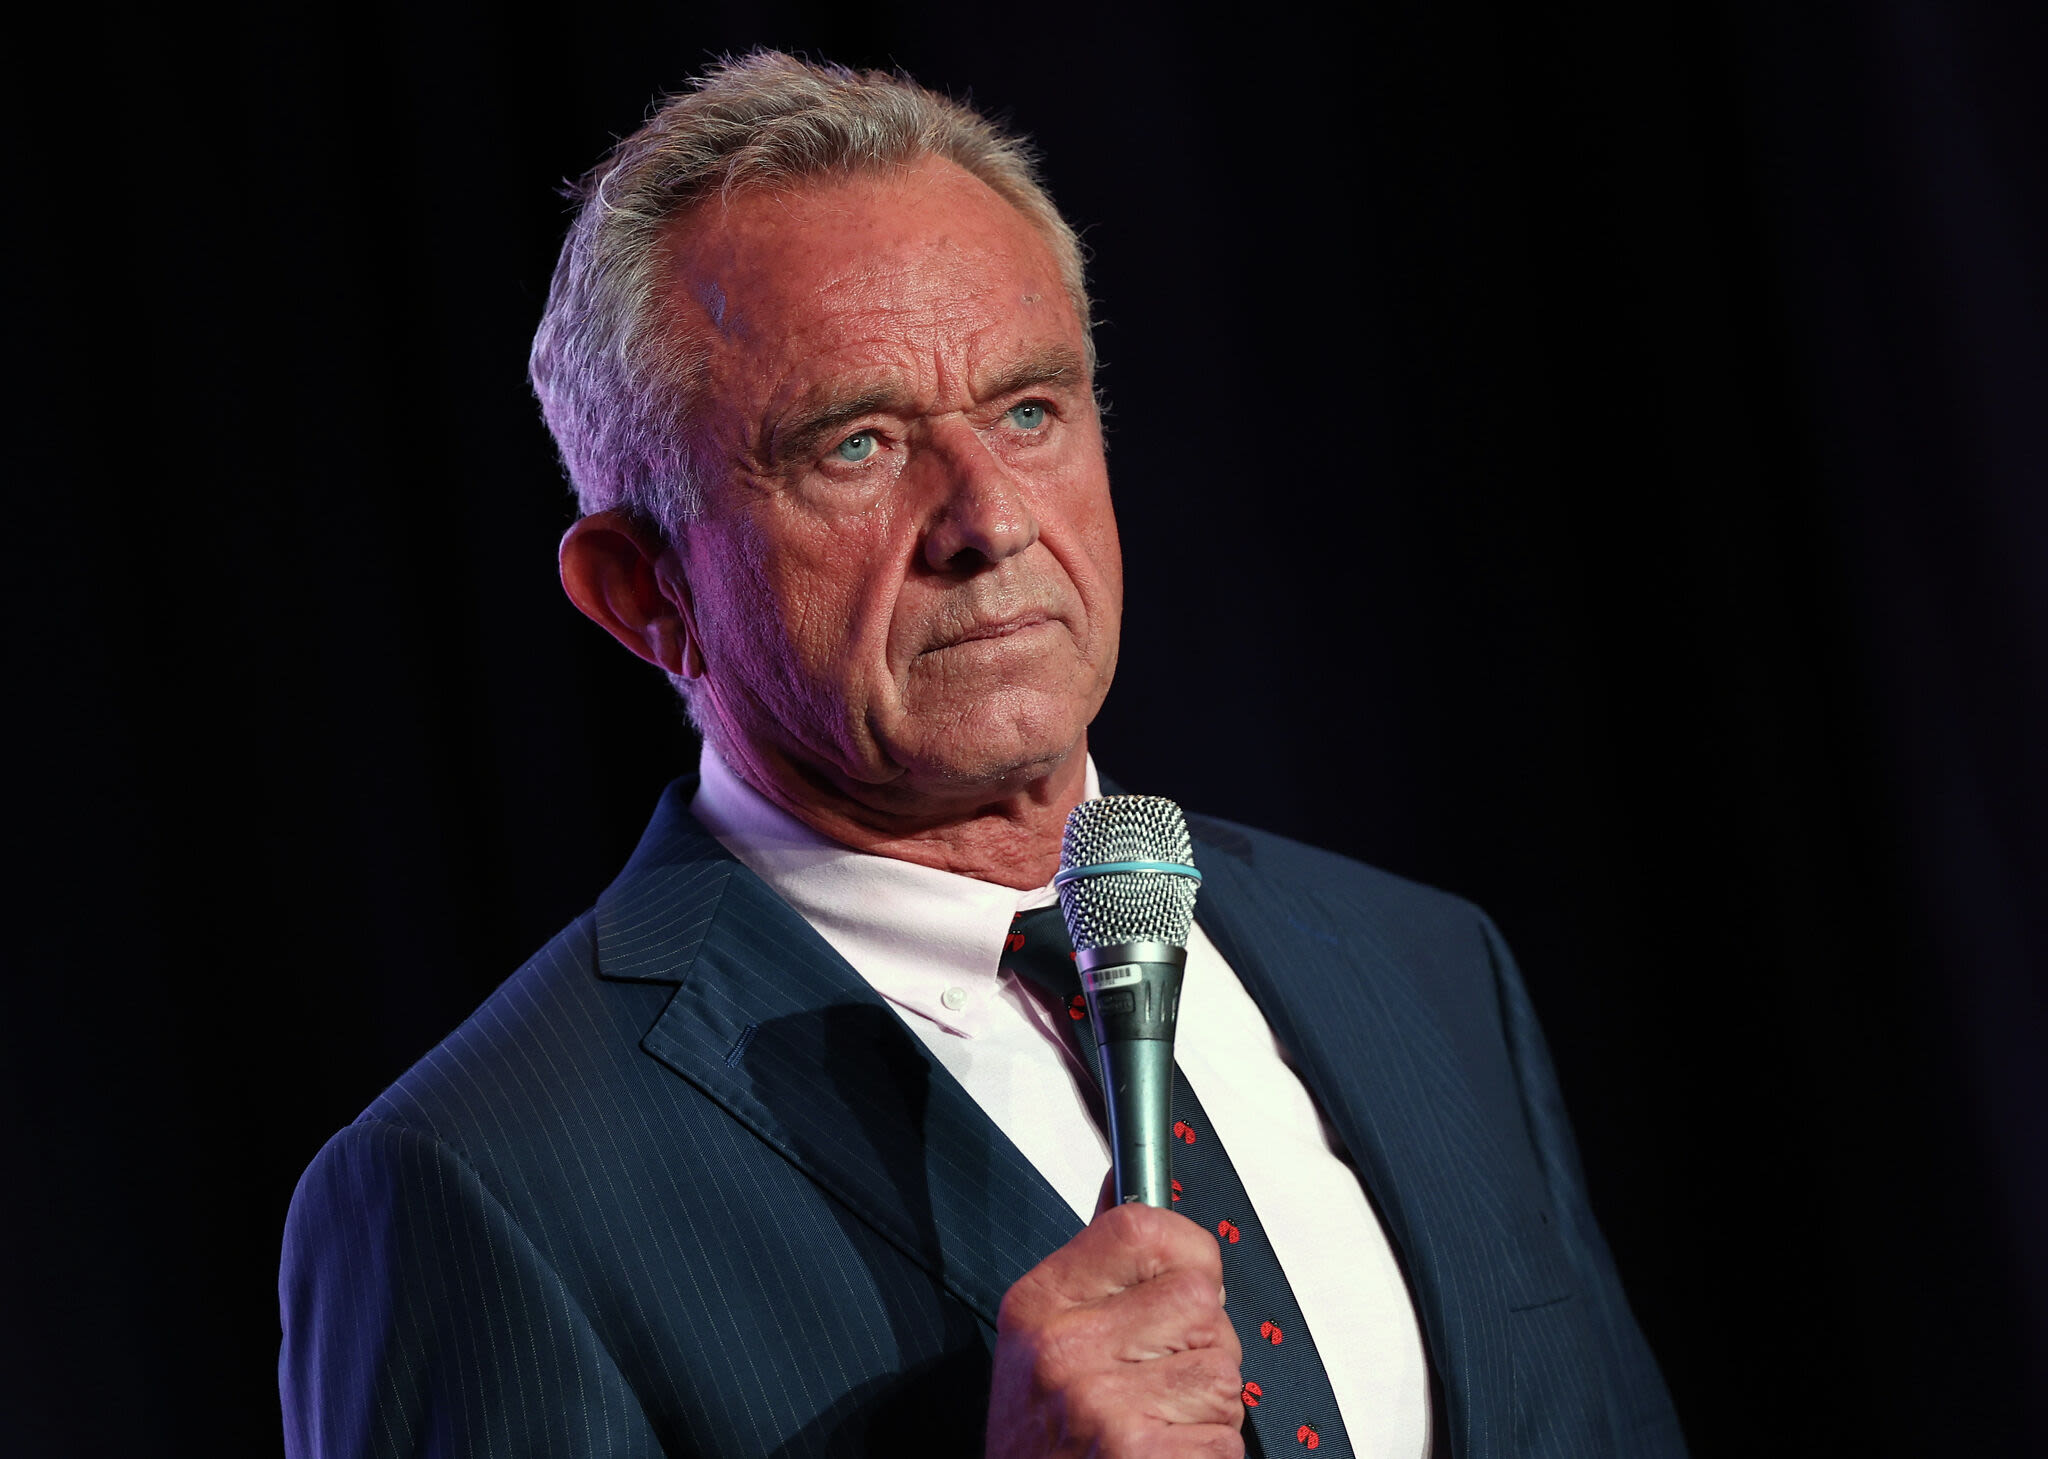 Robert F. Kennedy Jr. campaign accused of falsifying Texas ballot signatures